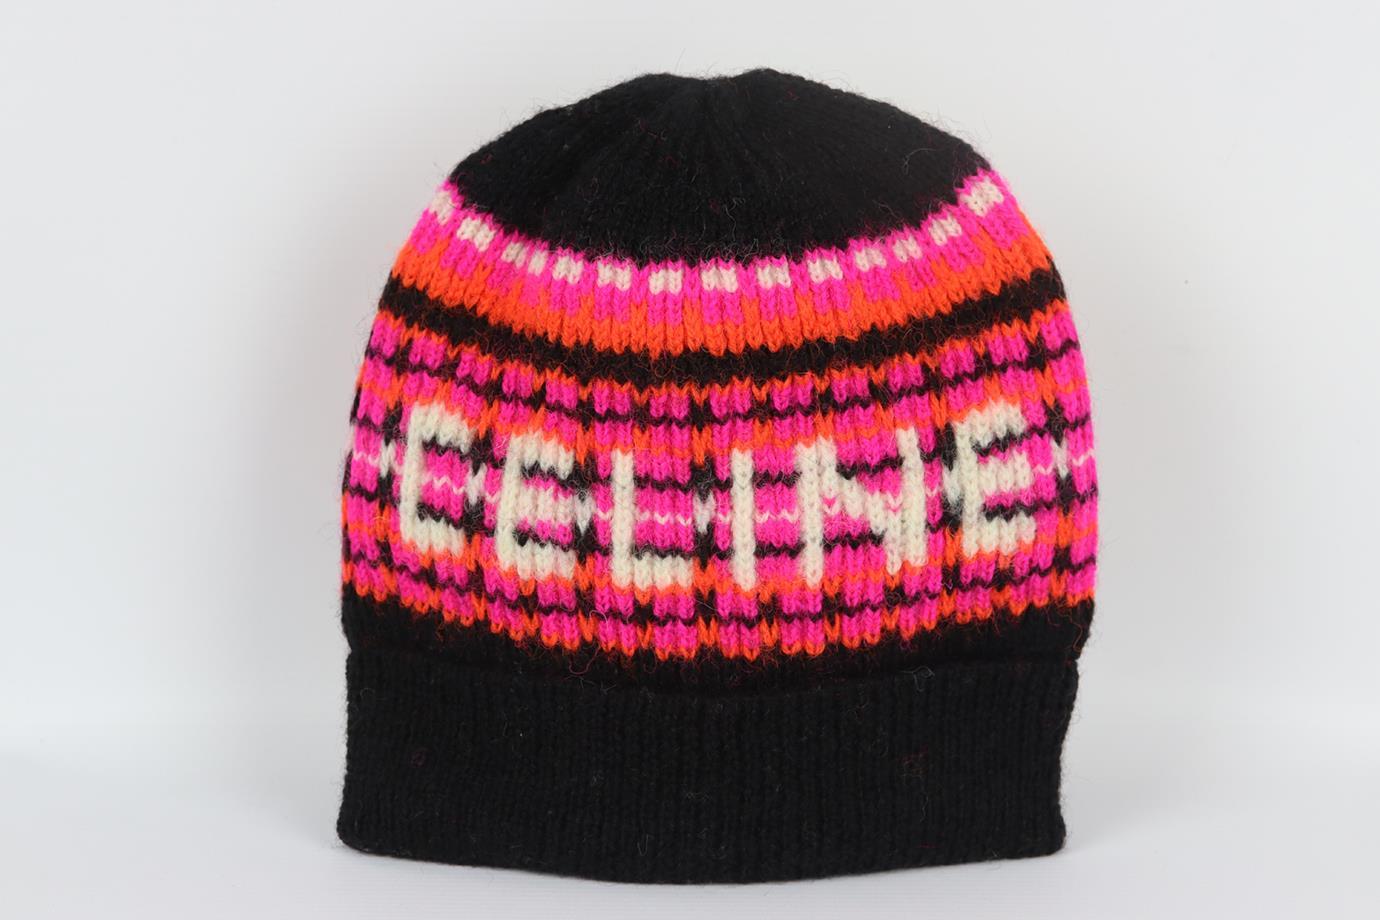 Celine logo jacquard wool beanie. Black, cream, pink and orange. Slips on. 100% Wool. Does not come with dustbag or box. Size: One Size: Circumference: 17 in. Very good condition - No sign of wear; see pictures.
